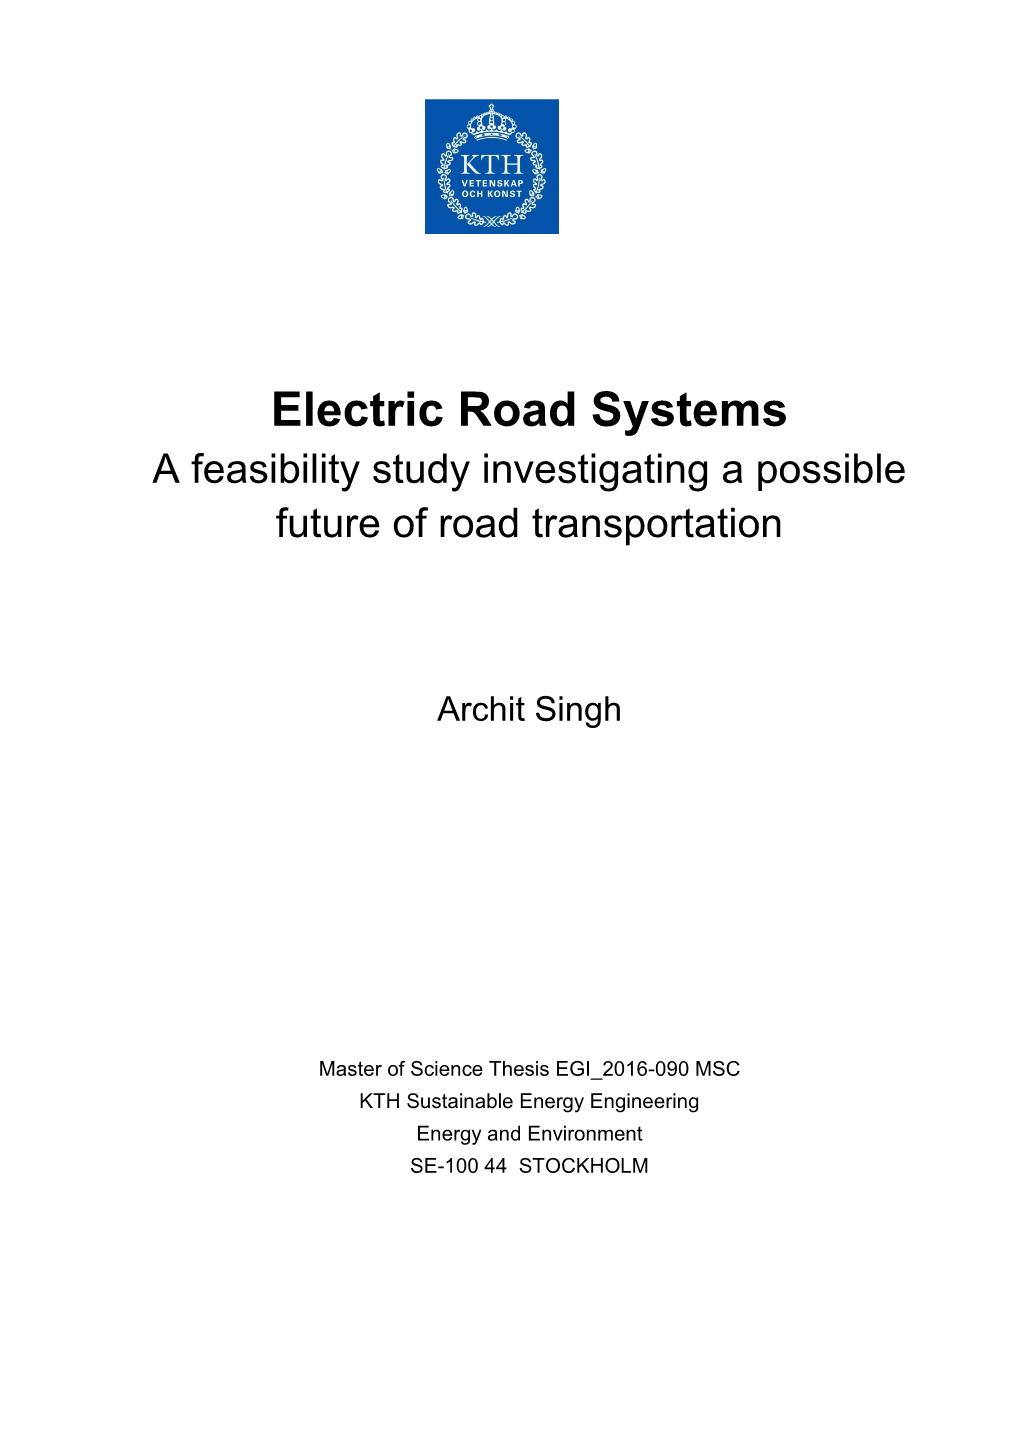 Electric Road Systems a Feasibility Study Investigating a Possible Future of Road Transportation